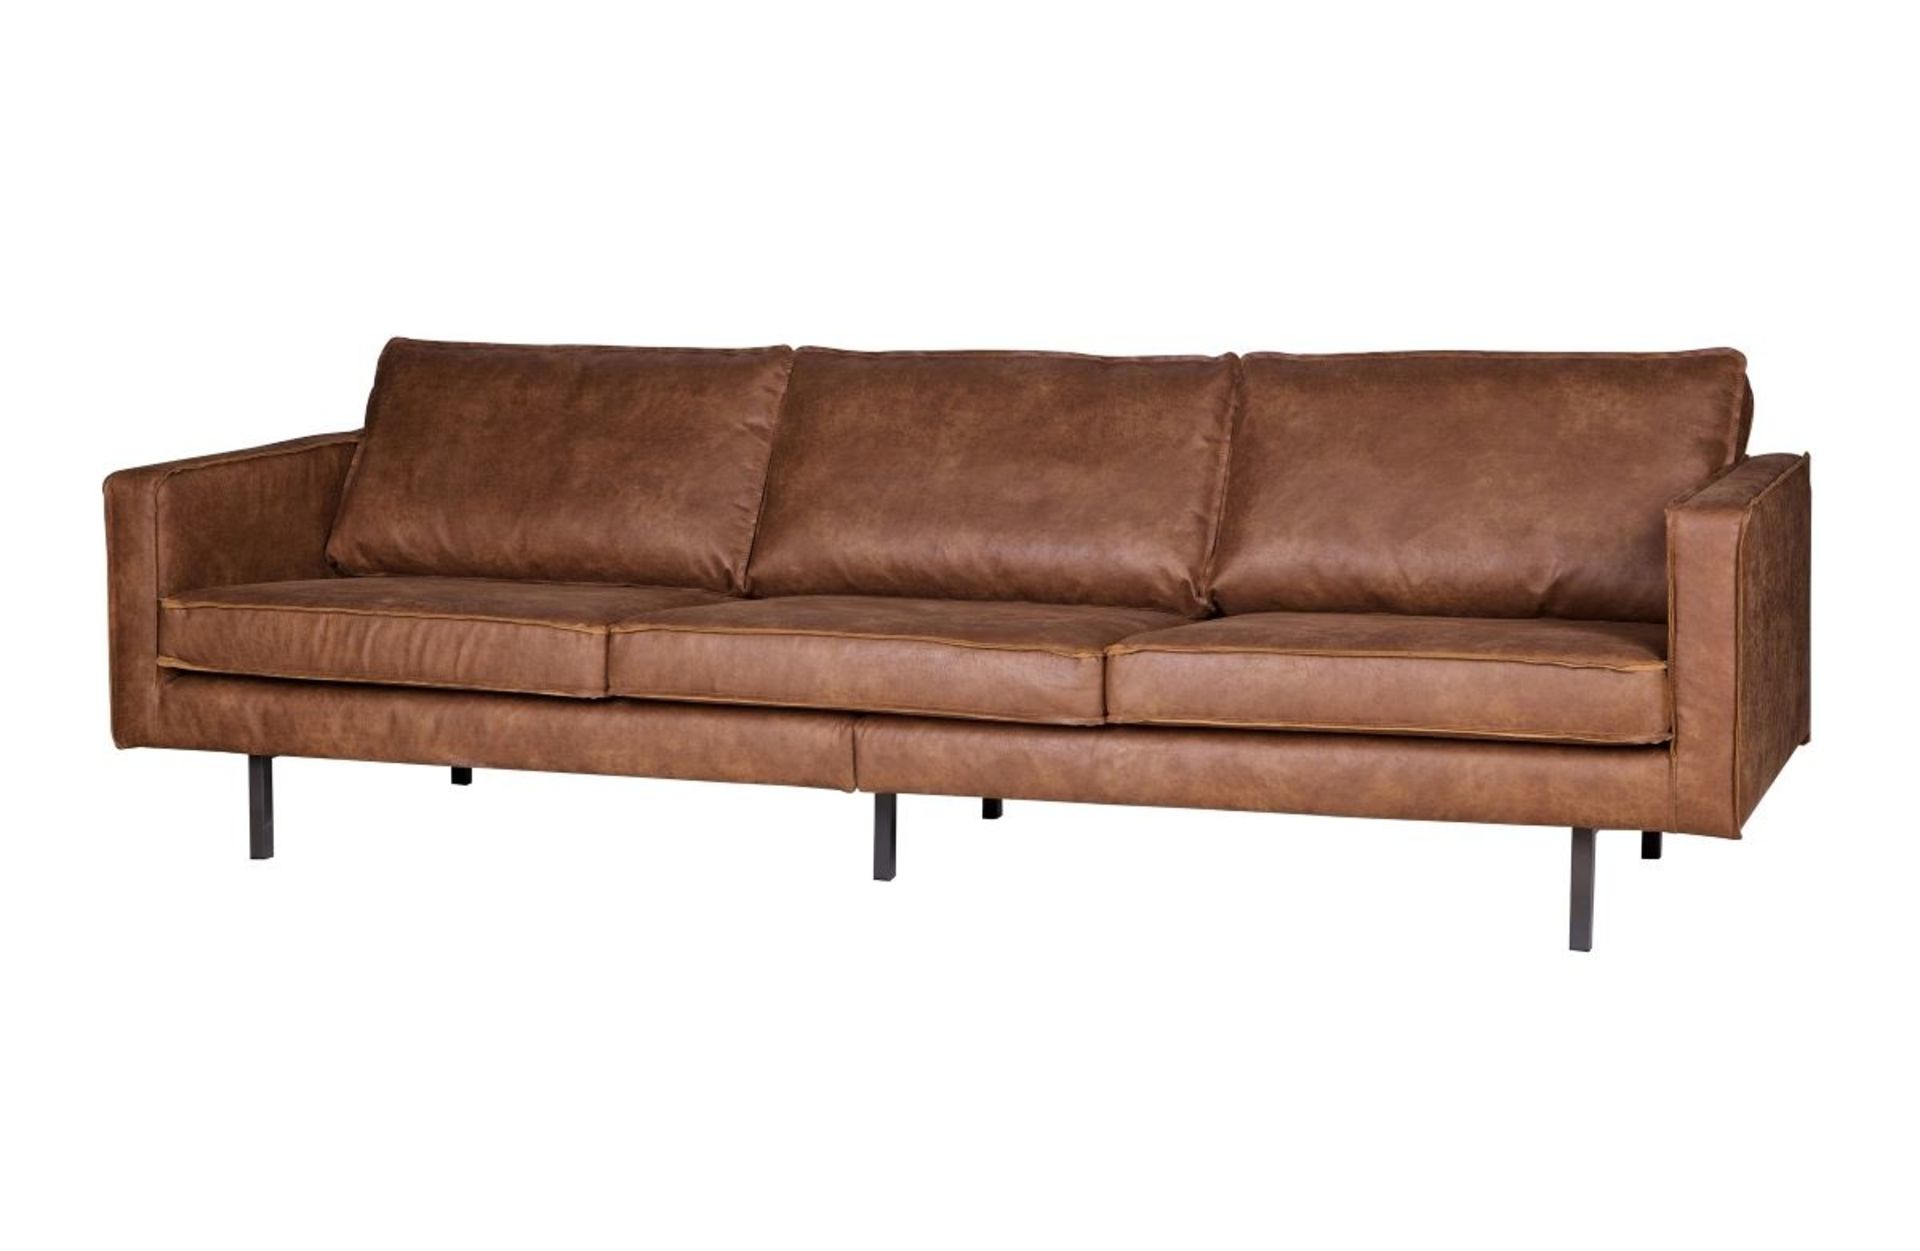 1 x 'Rodeo' Contemporary 3-Seater Leather Sofa In Cognac Brown - Original RRP £1,199.00 - Image 2 of 4